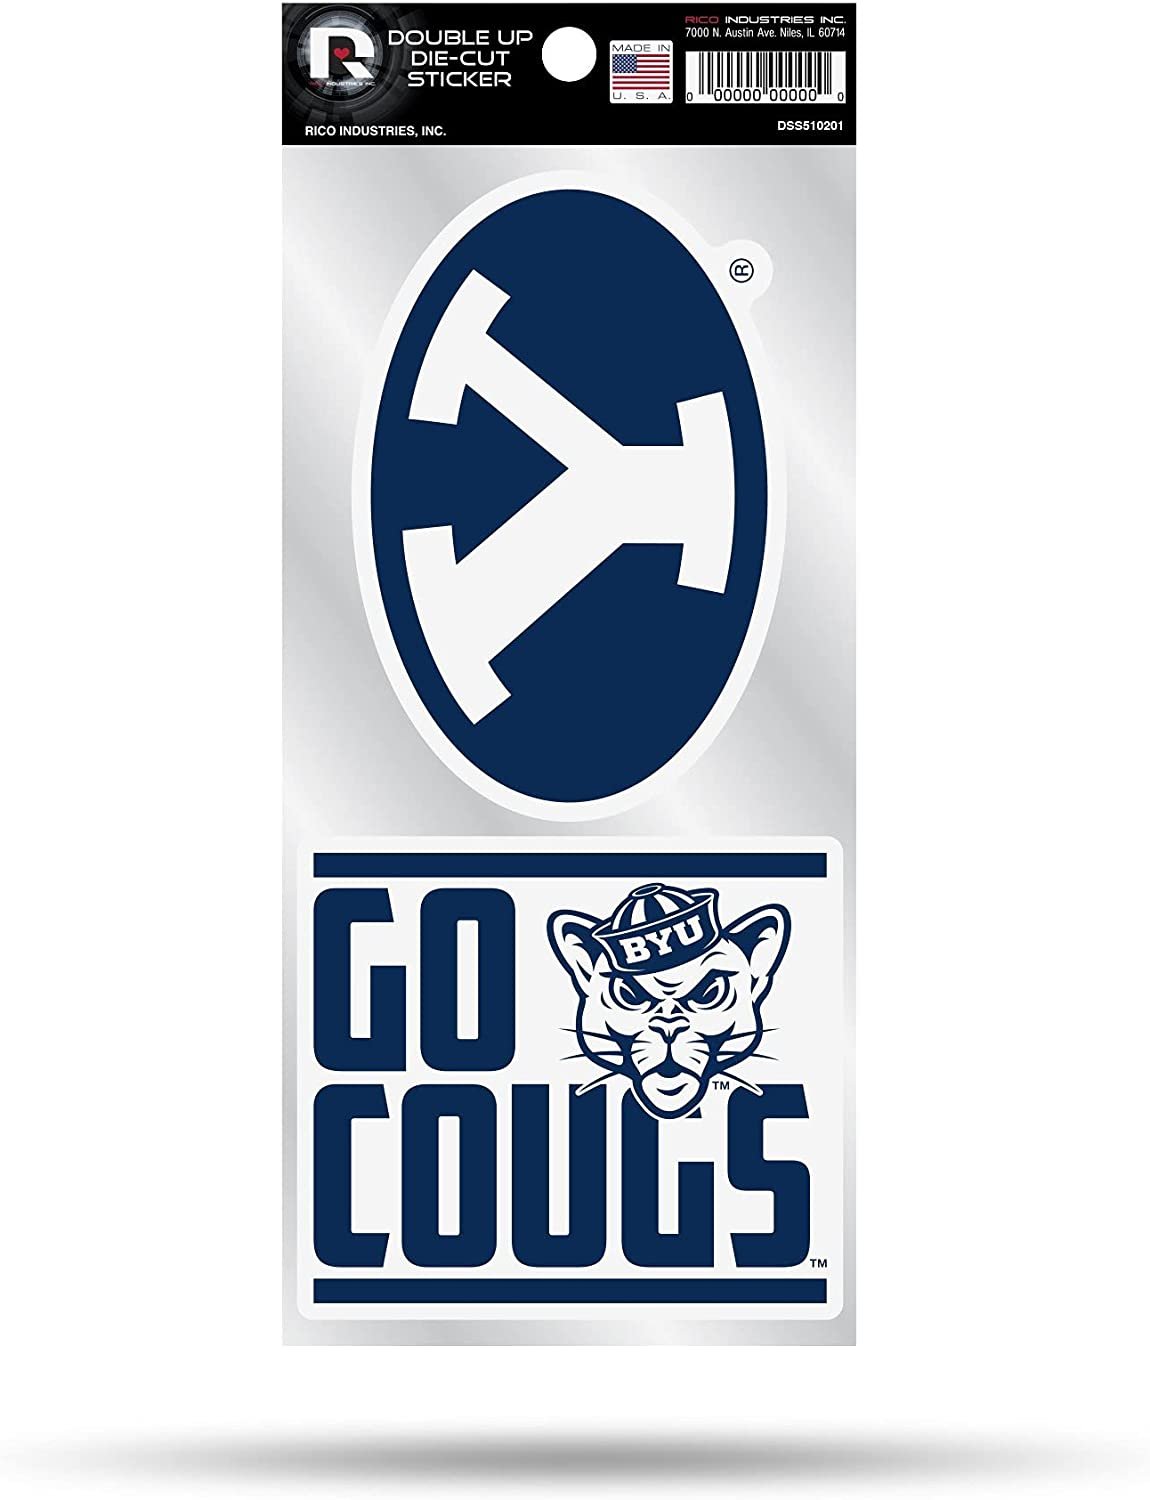 Brigham Young University Cougars BYU 2-Piece Double Up Die Cut Sticker Decal Sheet, 4x8 Inch